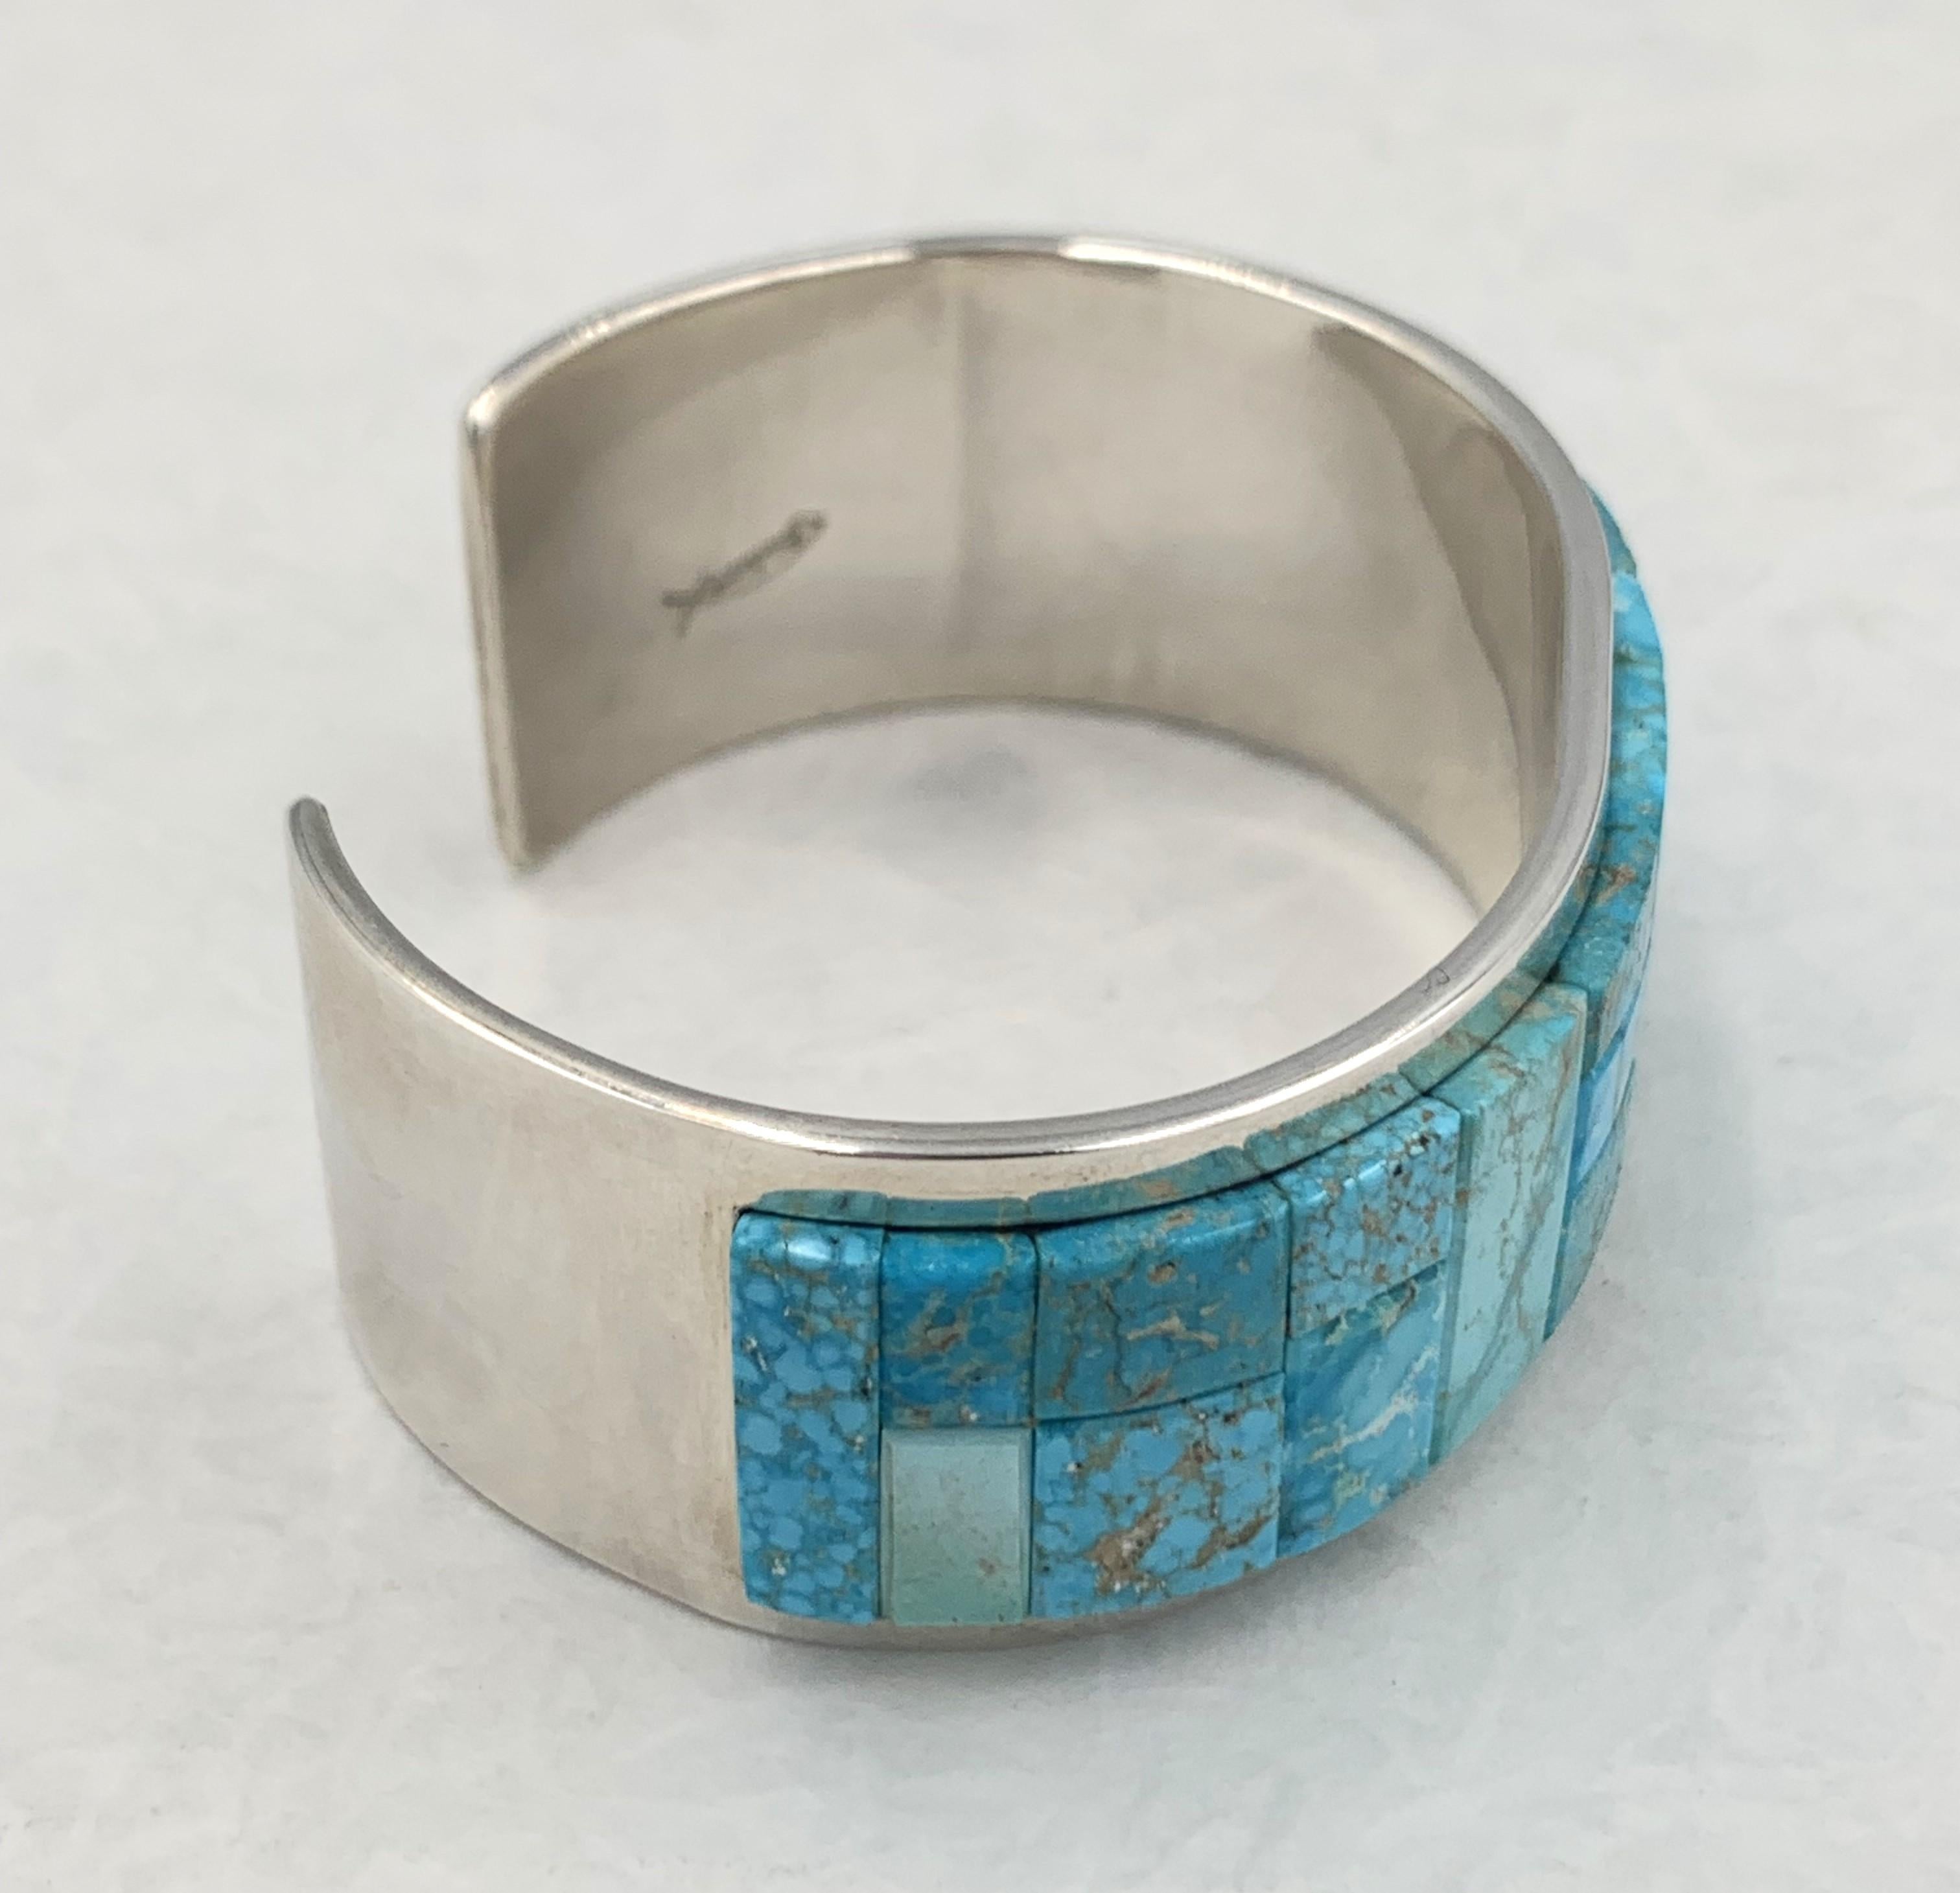 Sterling silver raised inlay turquoise cuff by master silversmith Tommy Jackson. The 1” cuff has Kingman turquoise inlay. The inside measurement is 6” with a 1” gap.

The Kingman Turquoise Mine is one of the oldest producing Turquoise mines in North